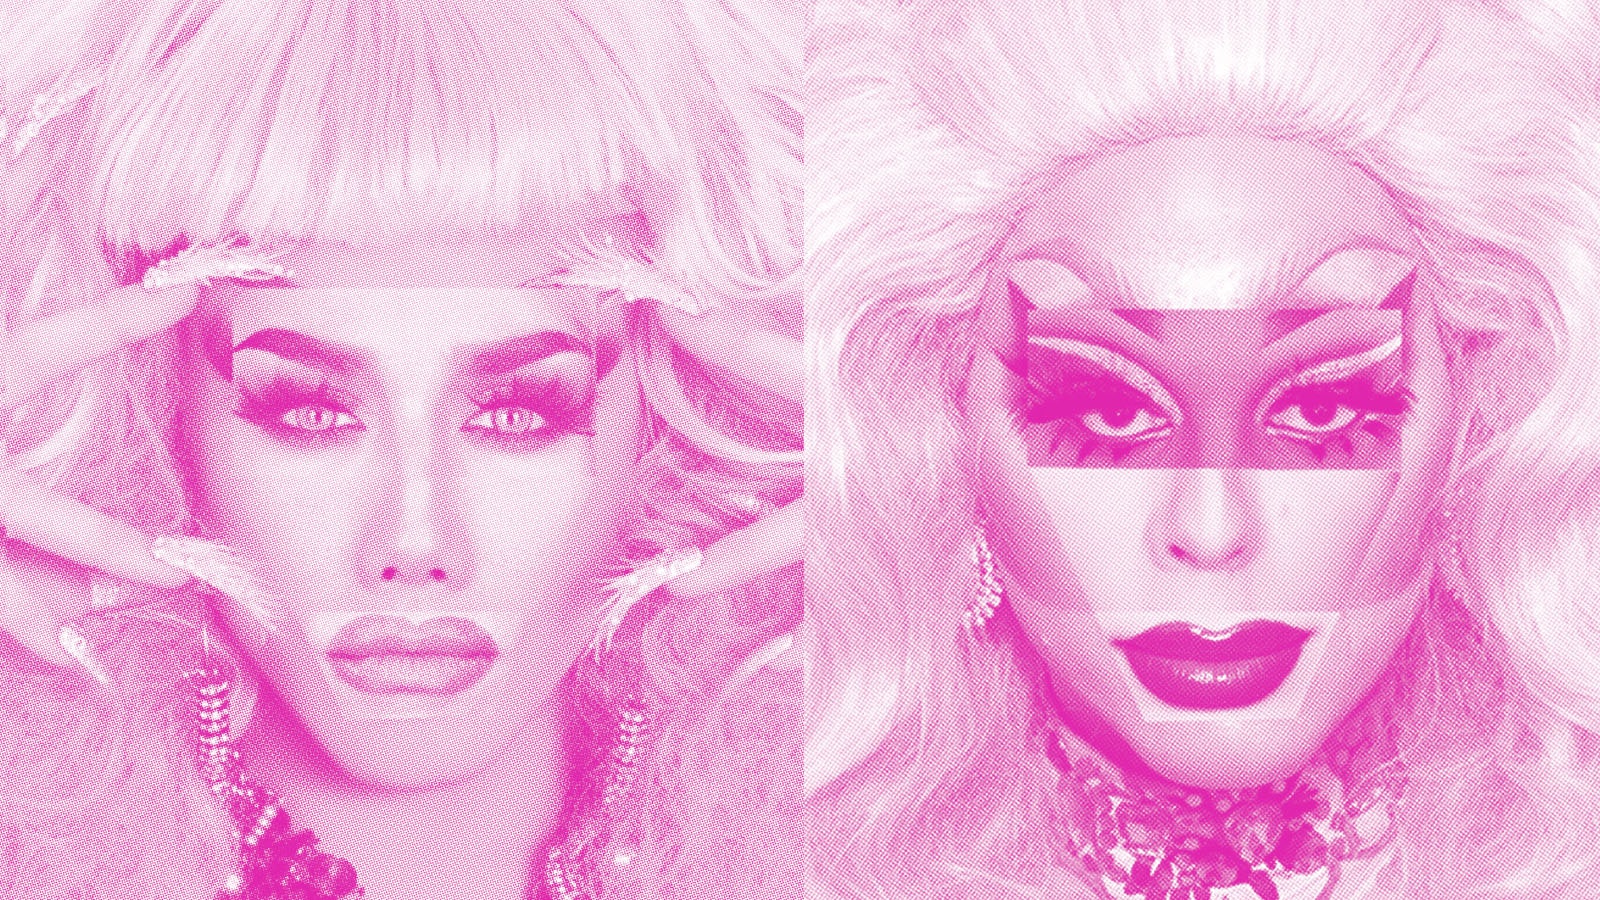 Supermodels of the World: A Drag Race Symposium